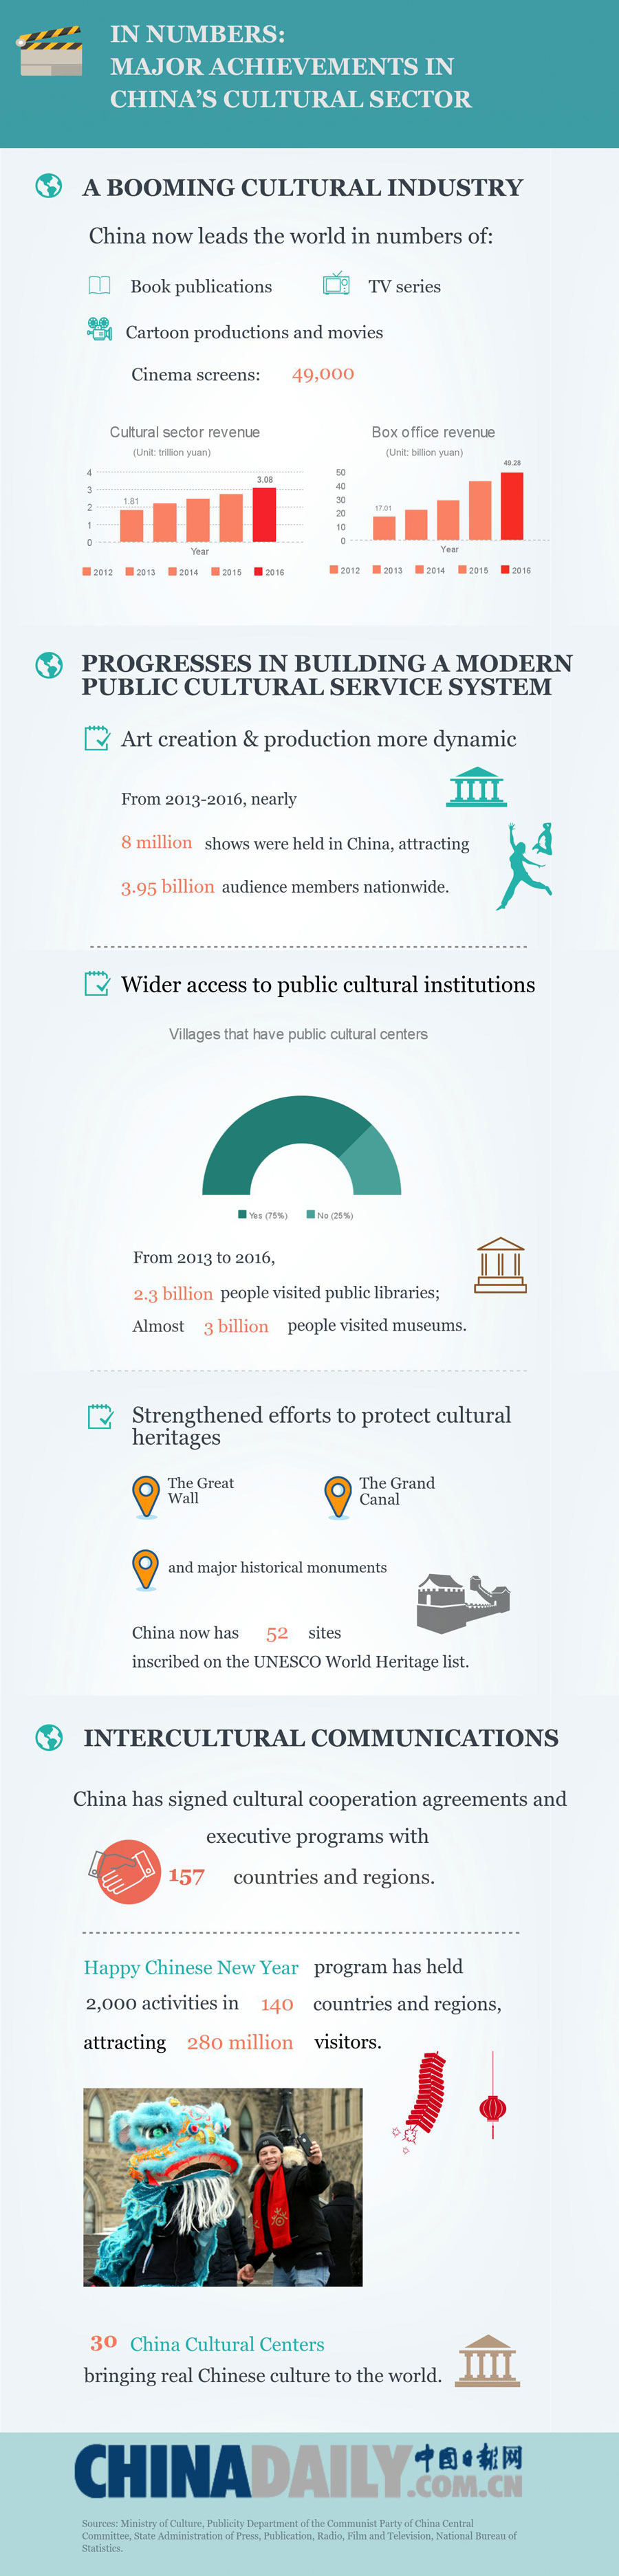 In numbers: Major achievements in China's cultural sector